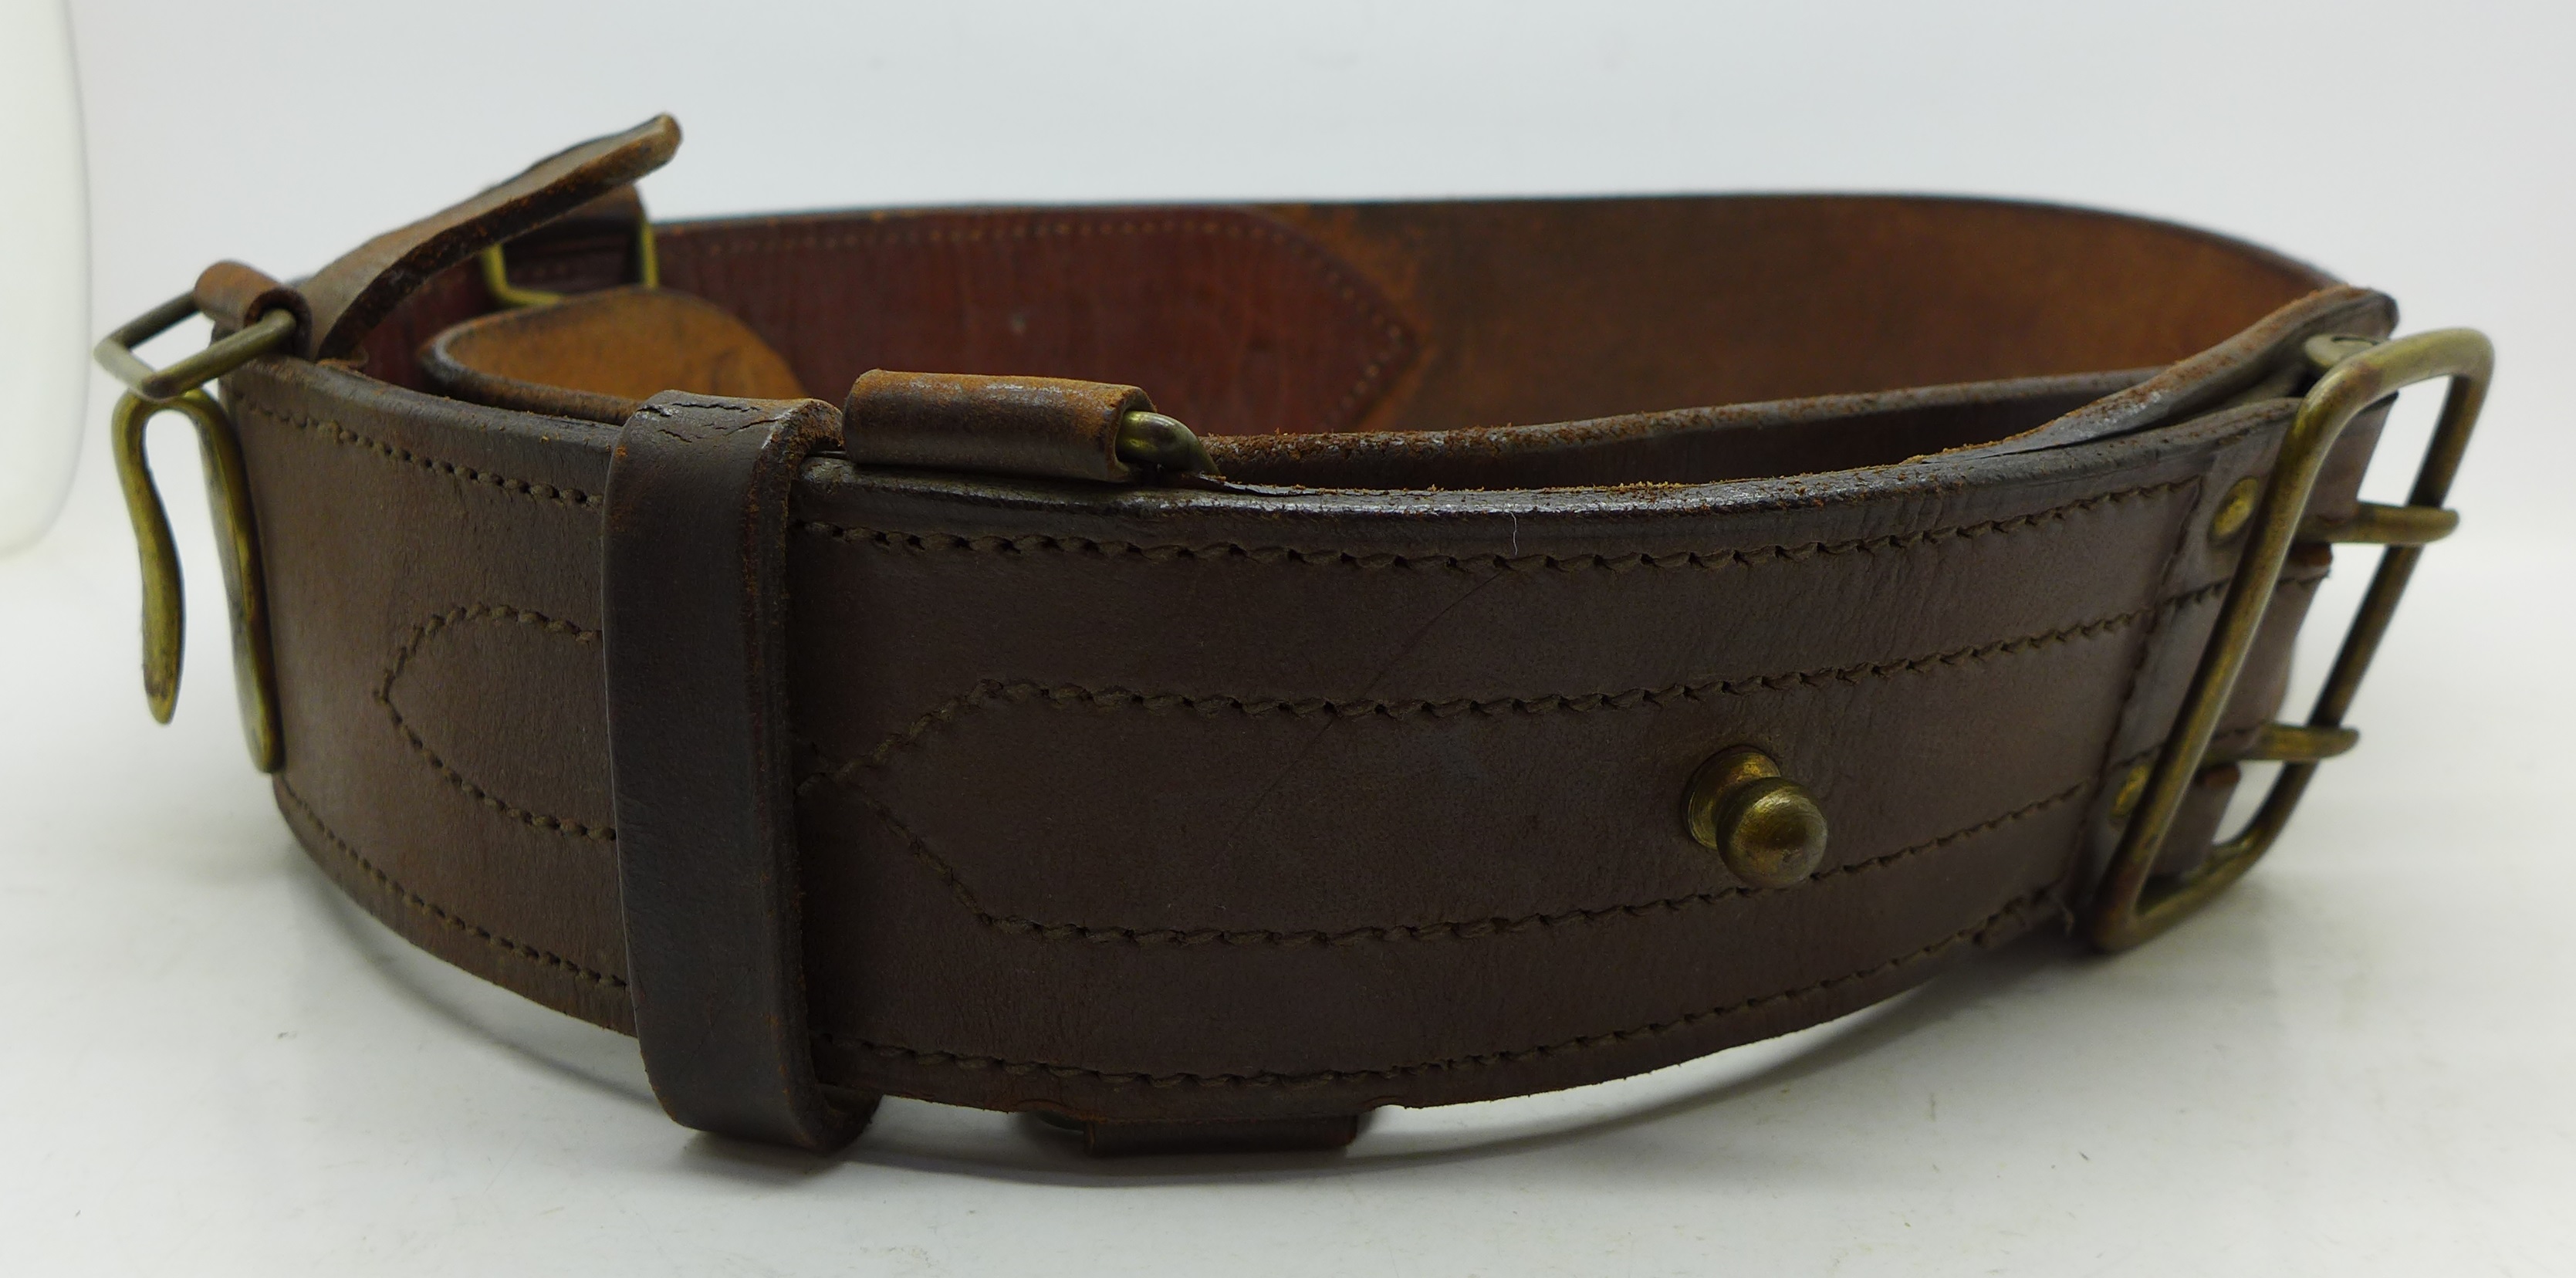 A leather military belt